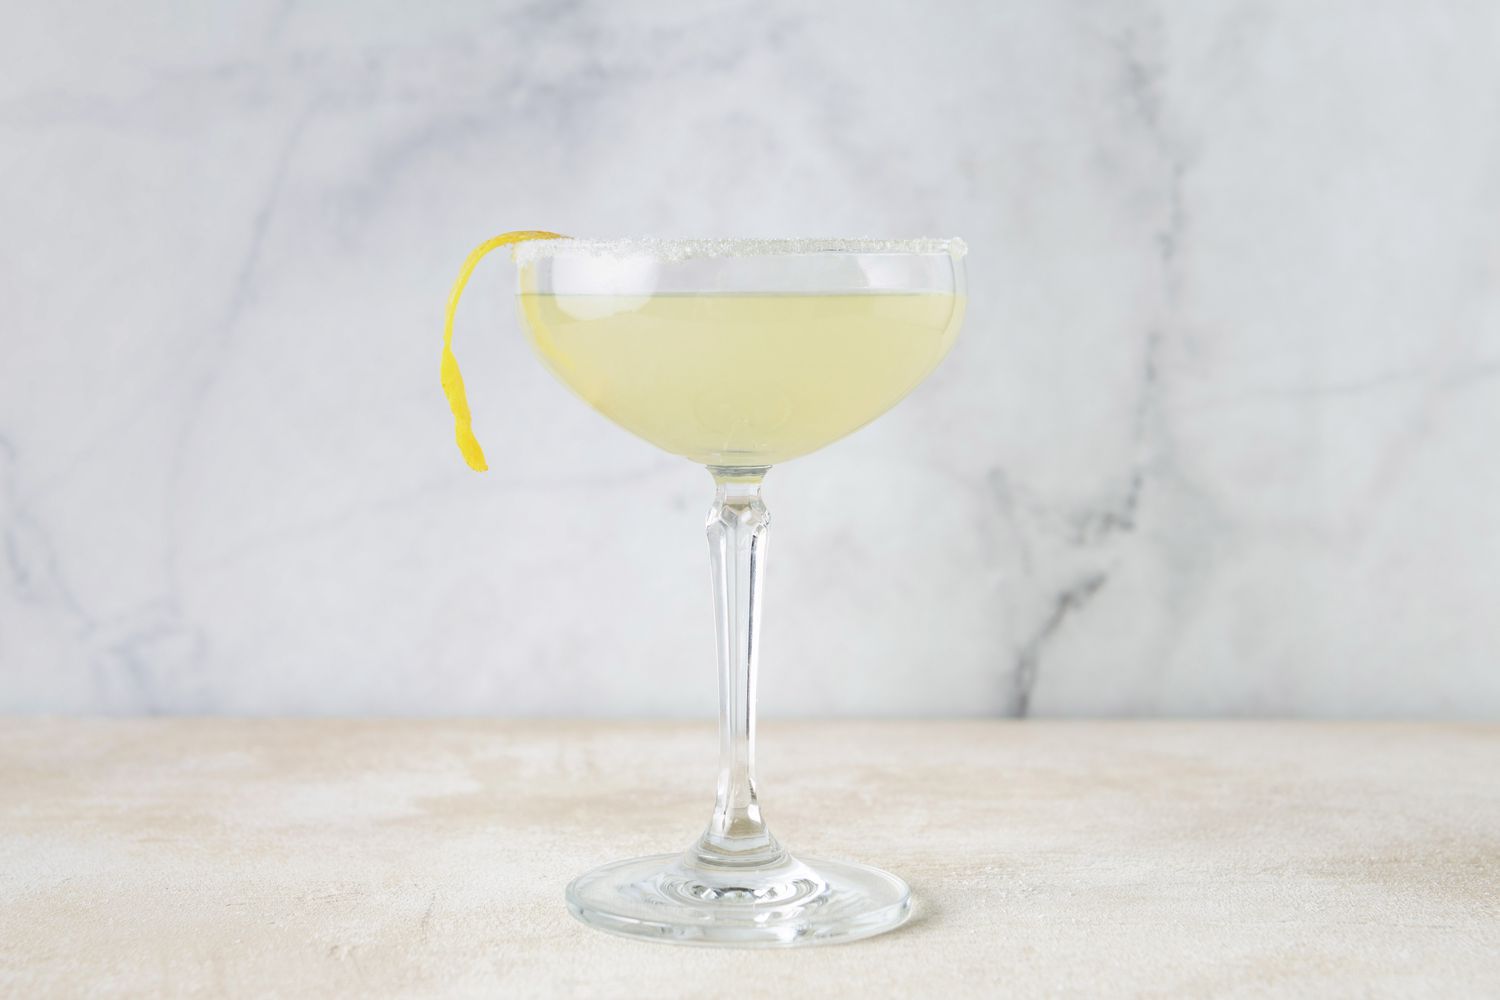 Lemon drop martini garnished with a lemon peel twist in a Champagne coupe